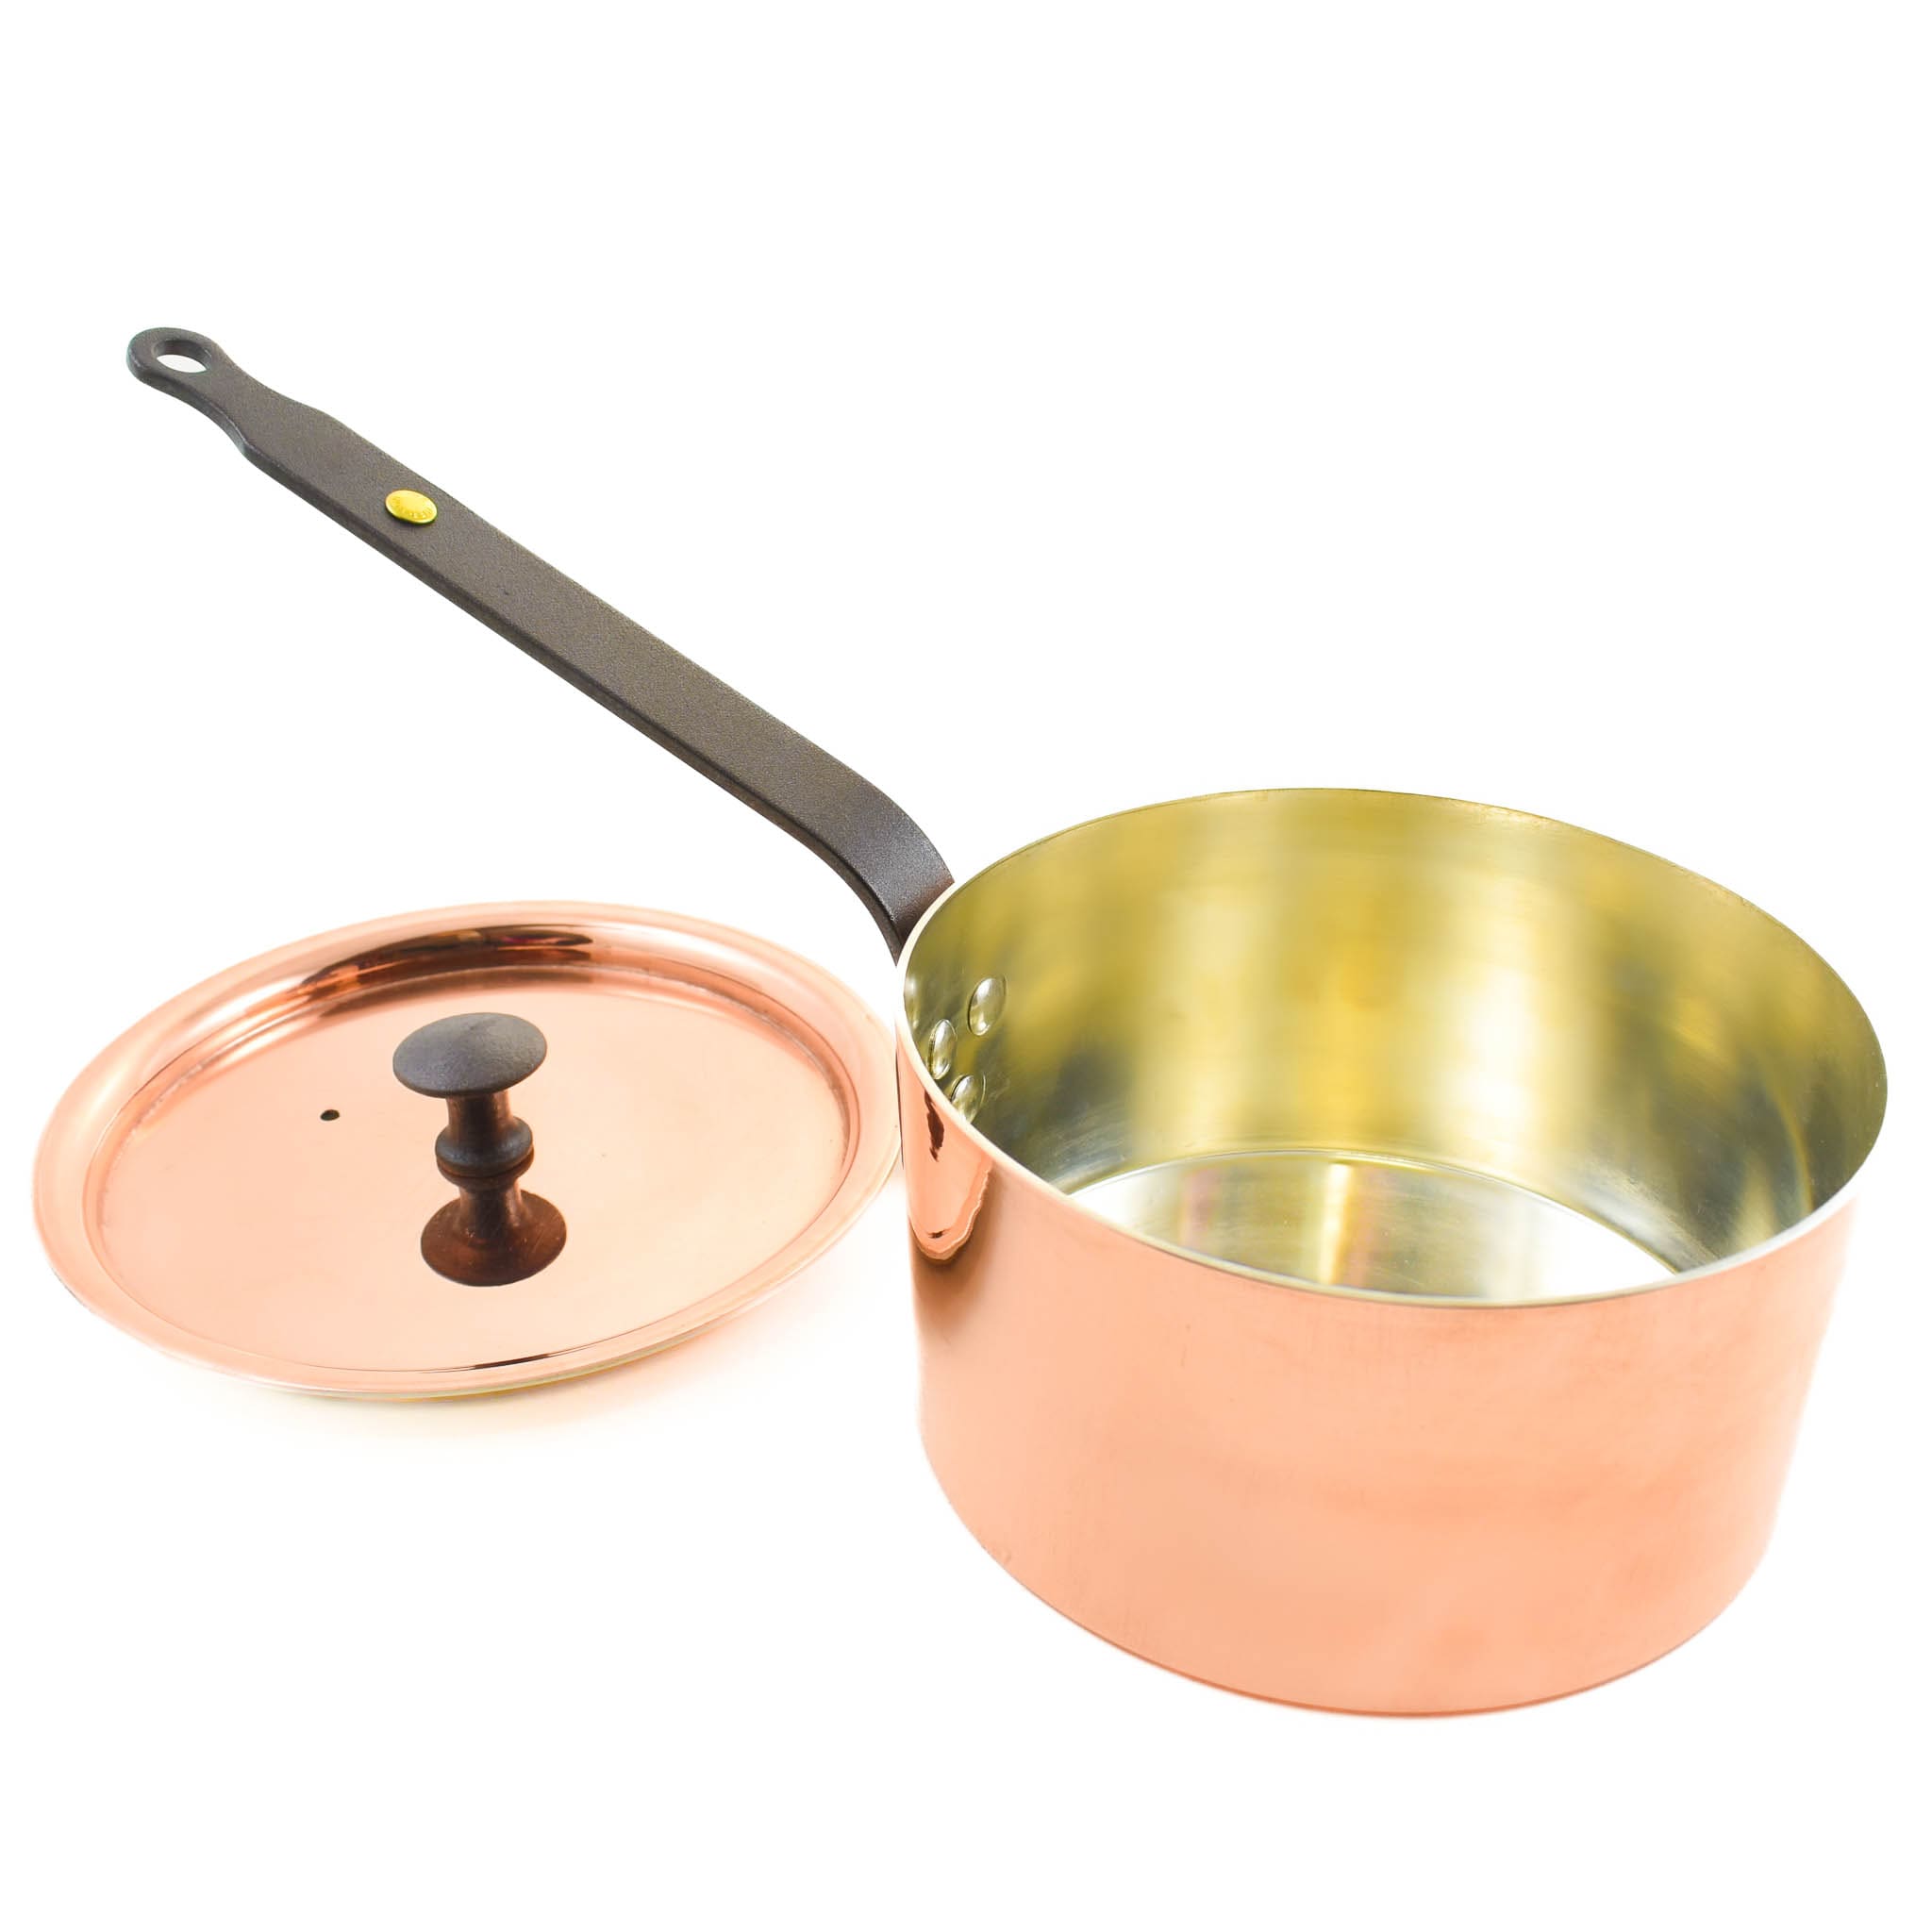 Netherton Foundry Copper Saucepan with Lid